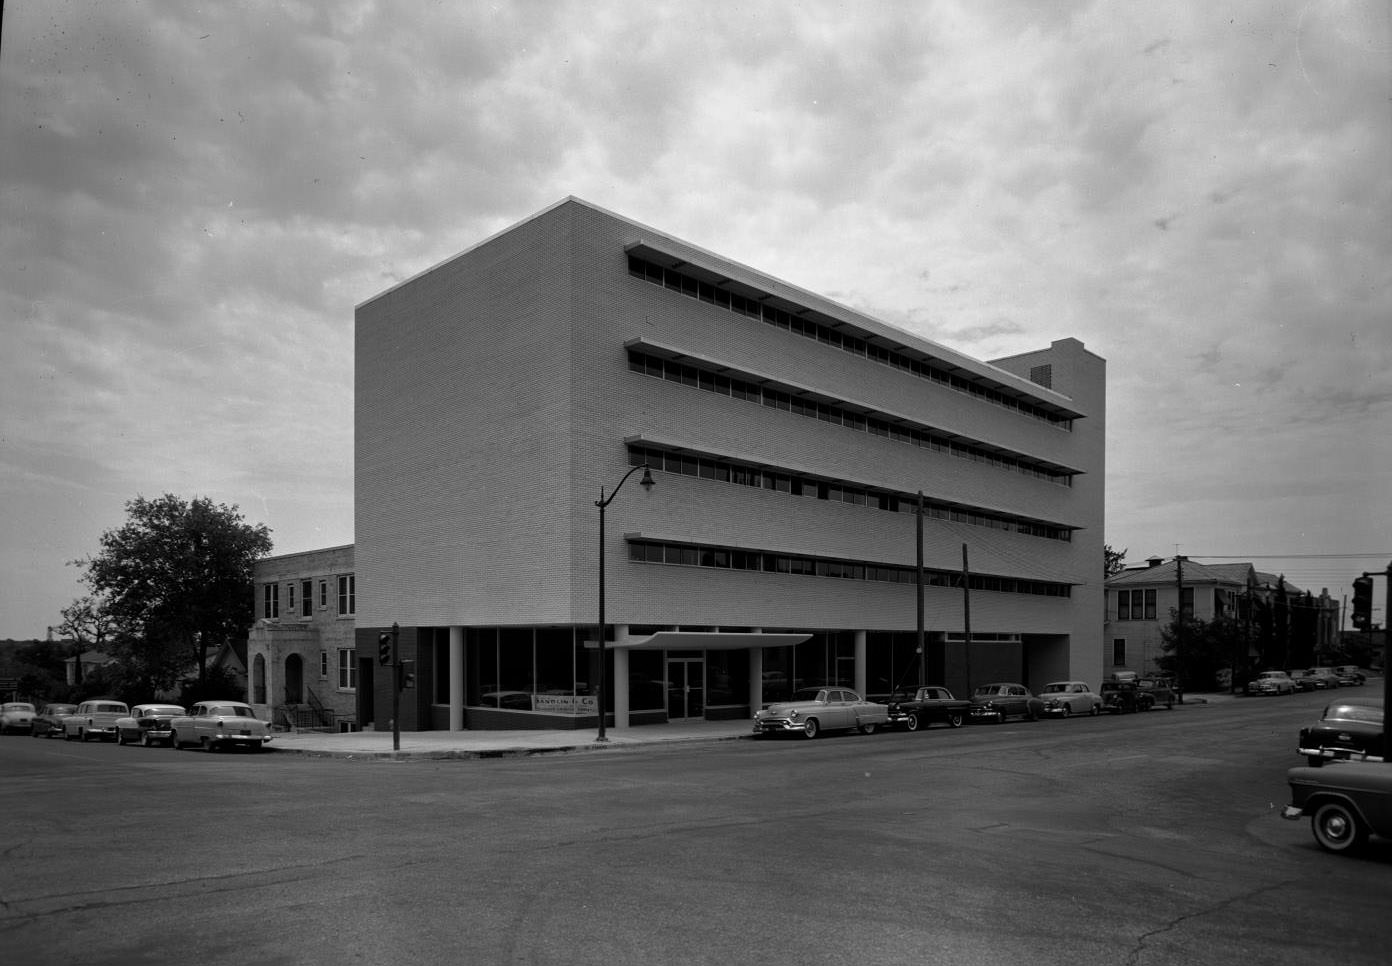 Exterior of Veterans of Foreign Wars Headquarters in Texas, 1956.